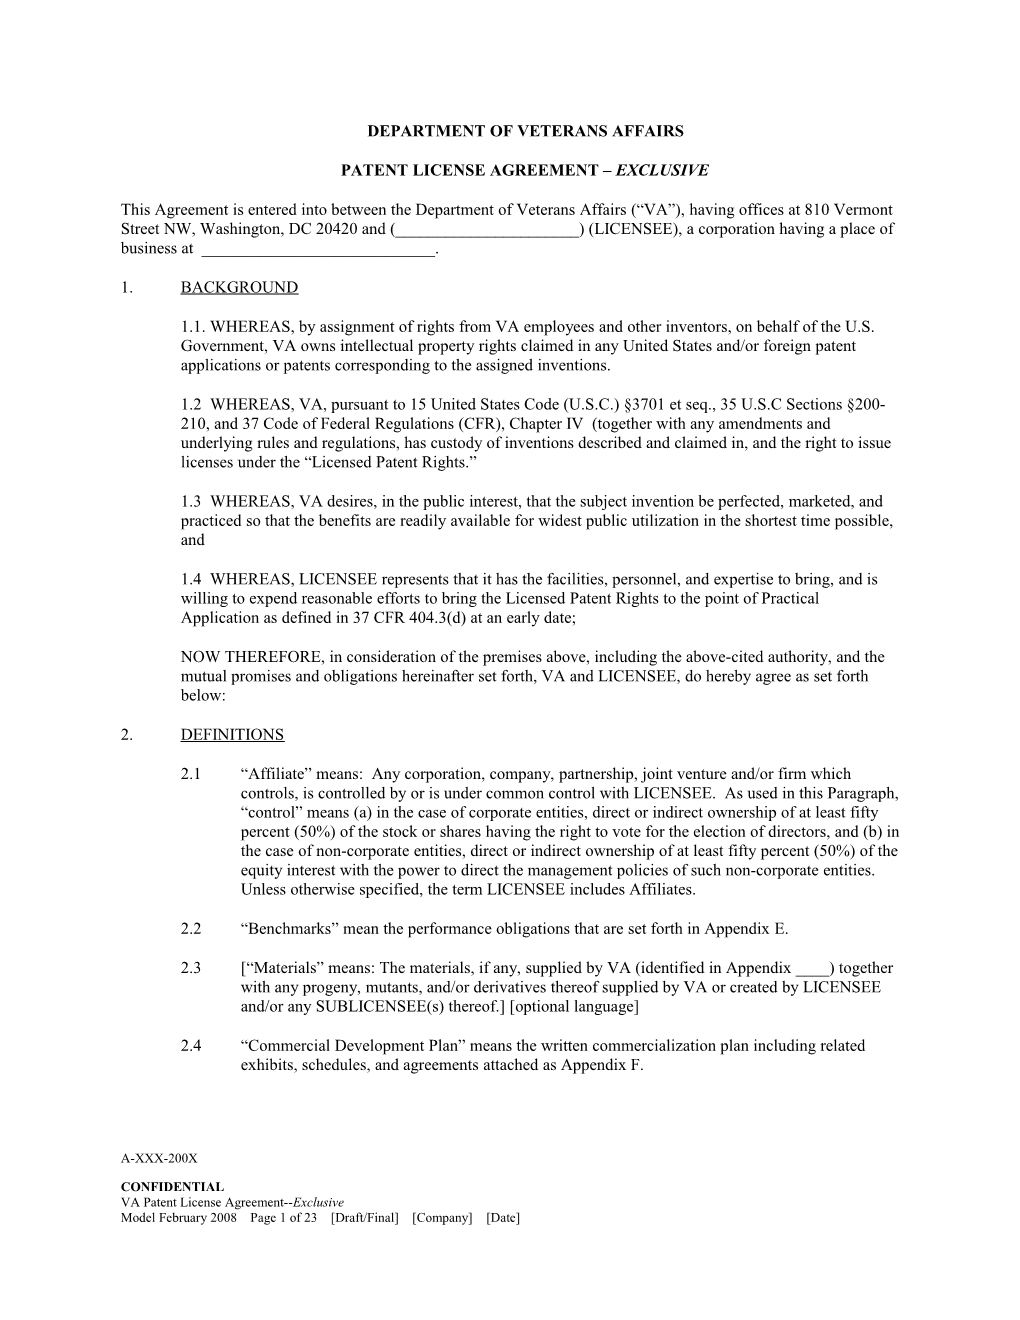 Patent License Agreement Exclusive